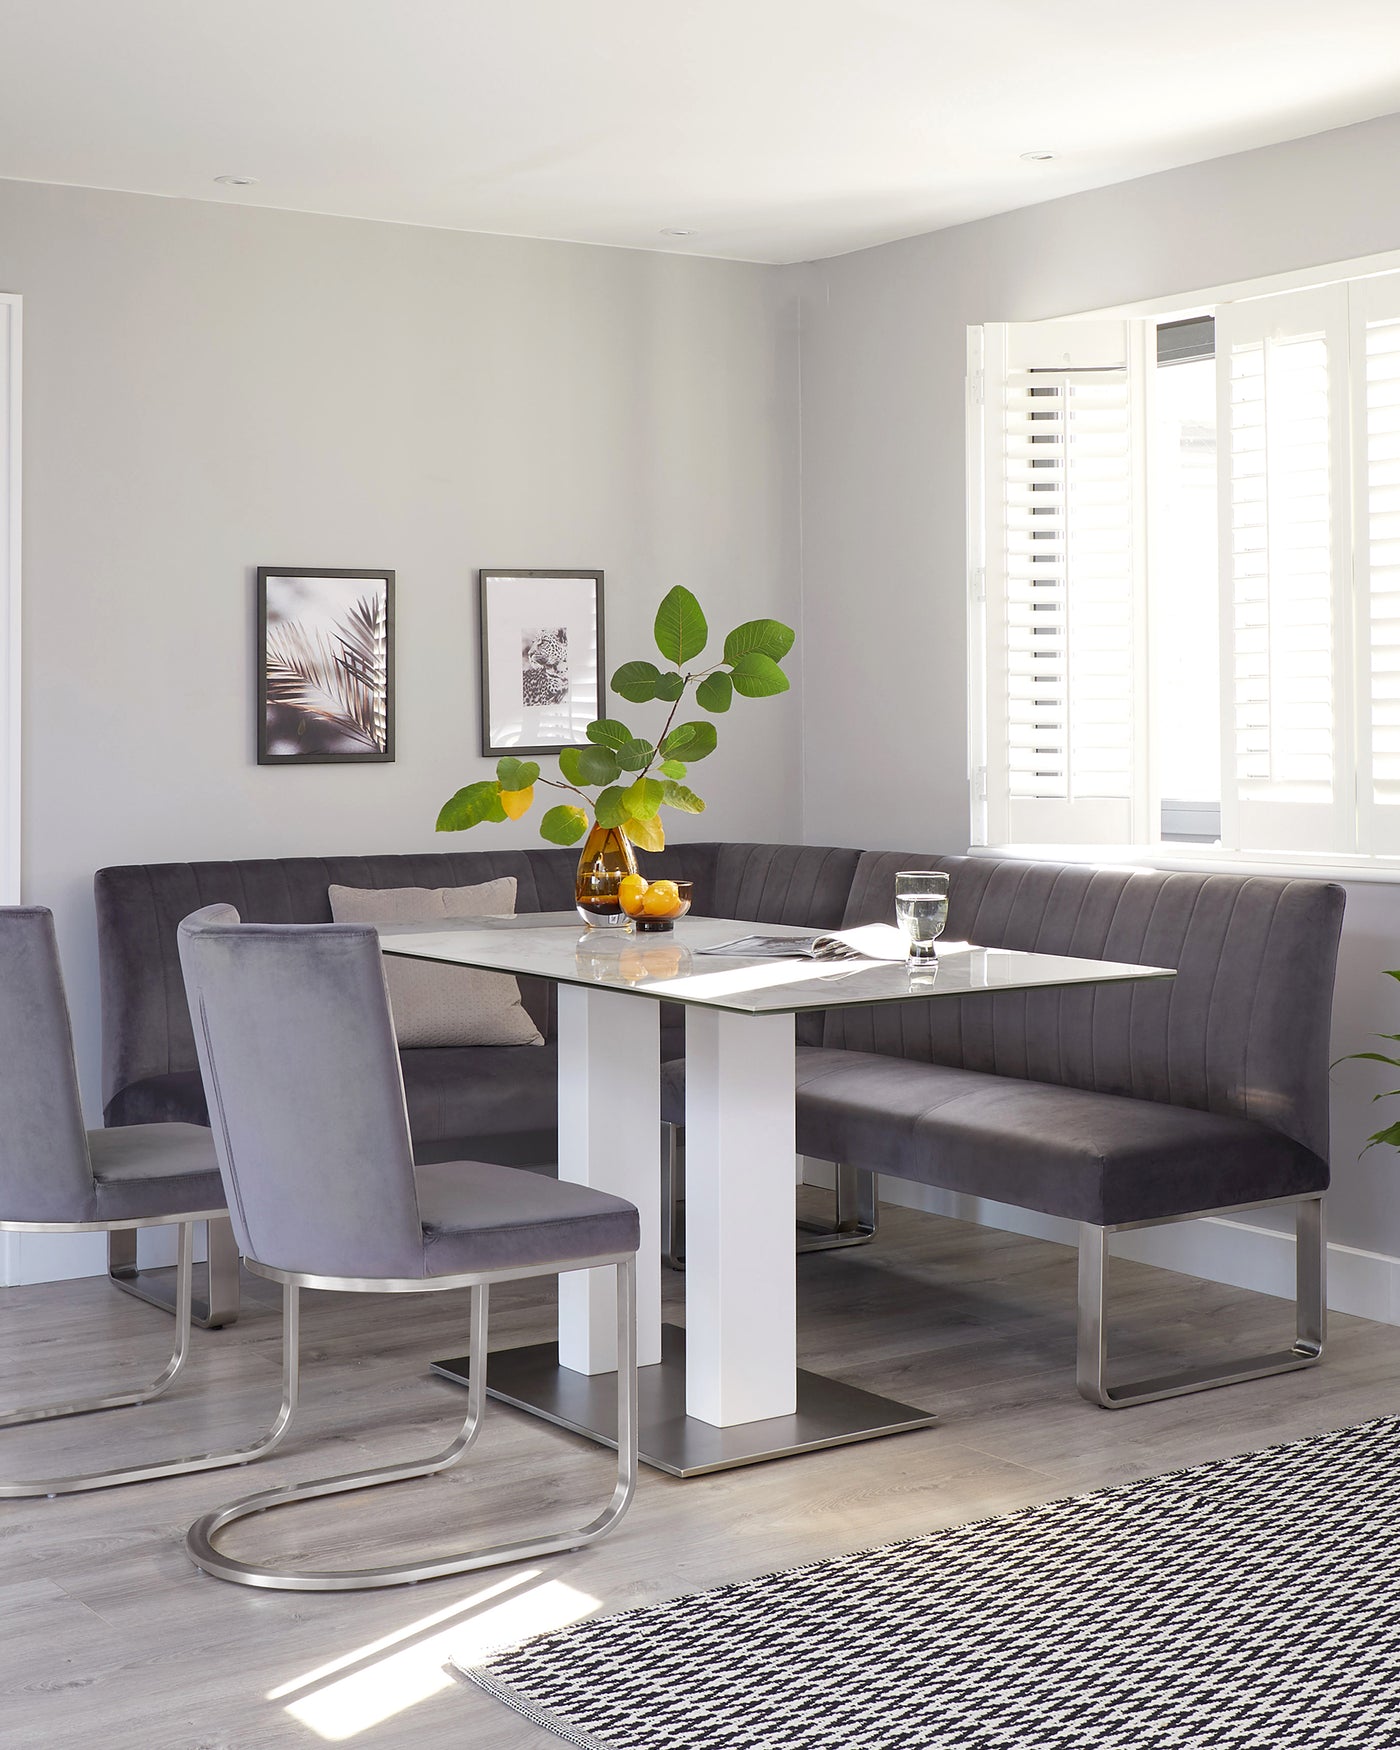 A contemporary dining set featuring a rectangular white table with a glossy finish and chrome accents at the base. Accompanying the table is a U-shaped, charcoal grey upholstered bench with a tufted backrest and three matching chairs with curved chrome legs and padded grey upholstery. The set is positioned on a sleek, wood laminate floor with a geometric black and white area rug beneath.